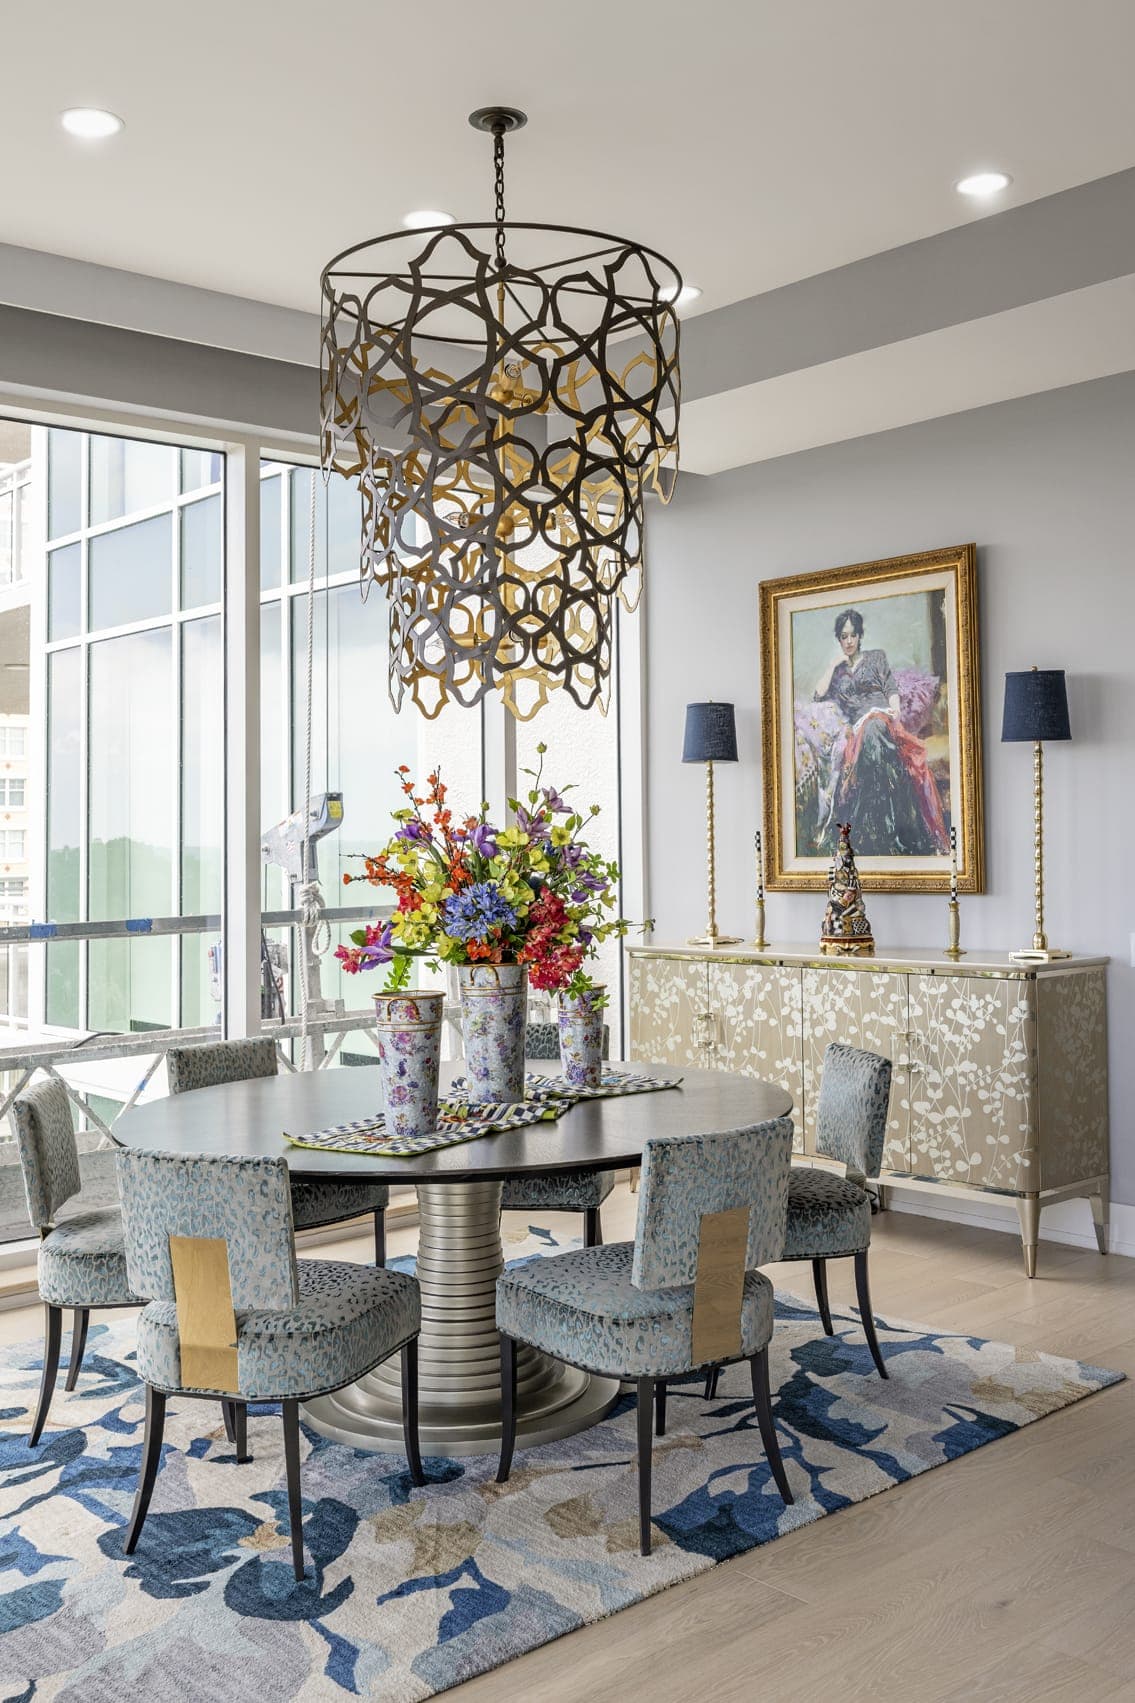 Dining Area Blue Lepeord Print Dining Chairs Grey Painted Walls With Gold Fixtures And Furniture